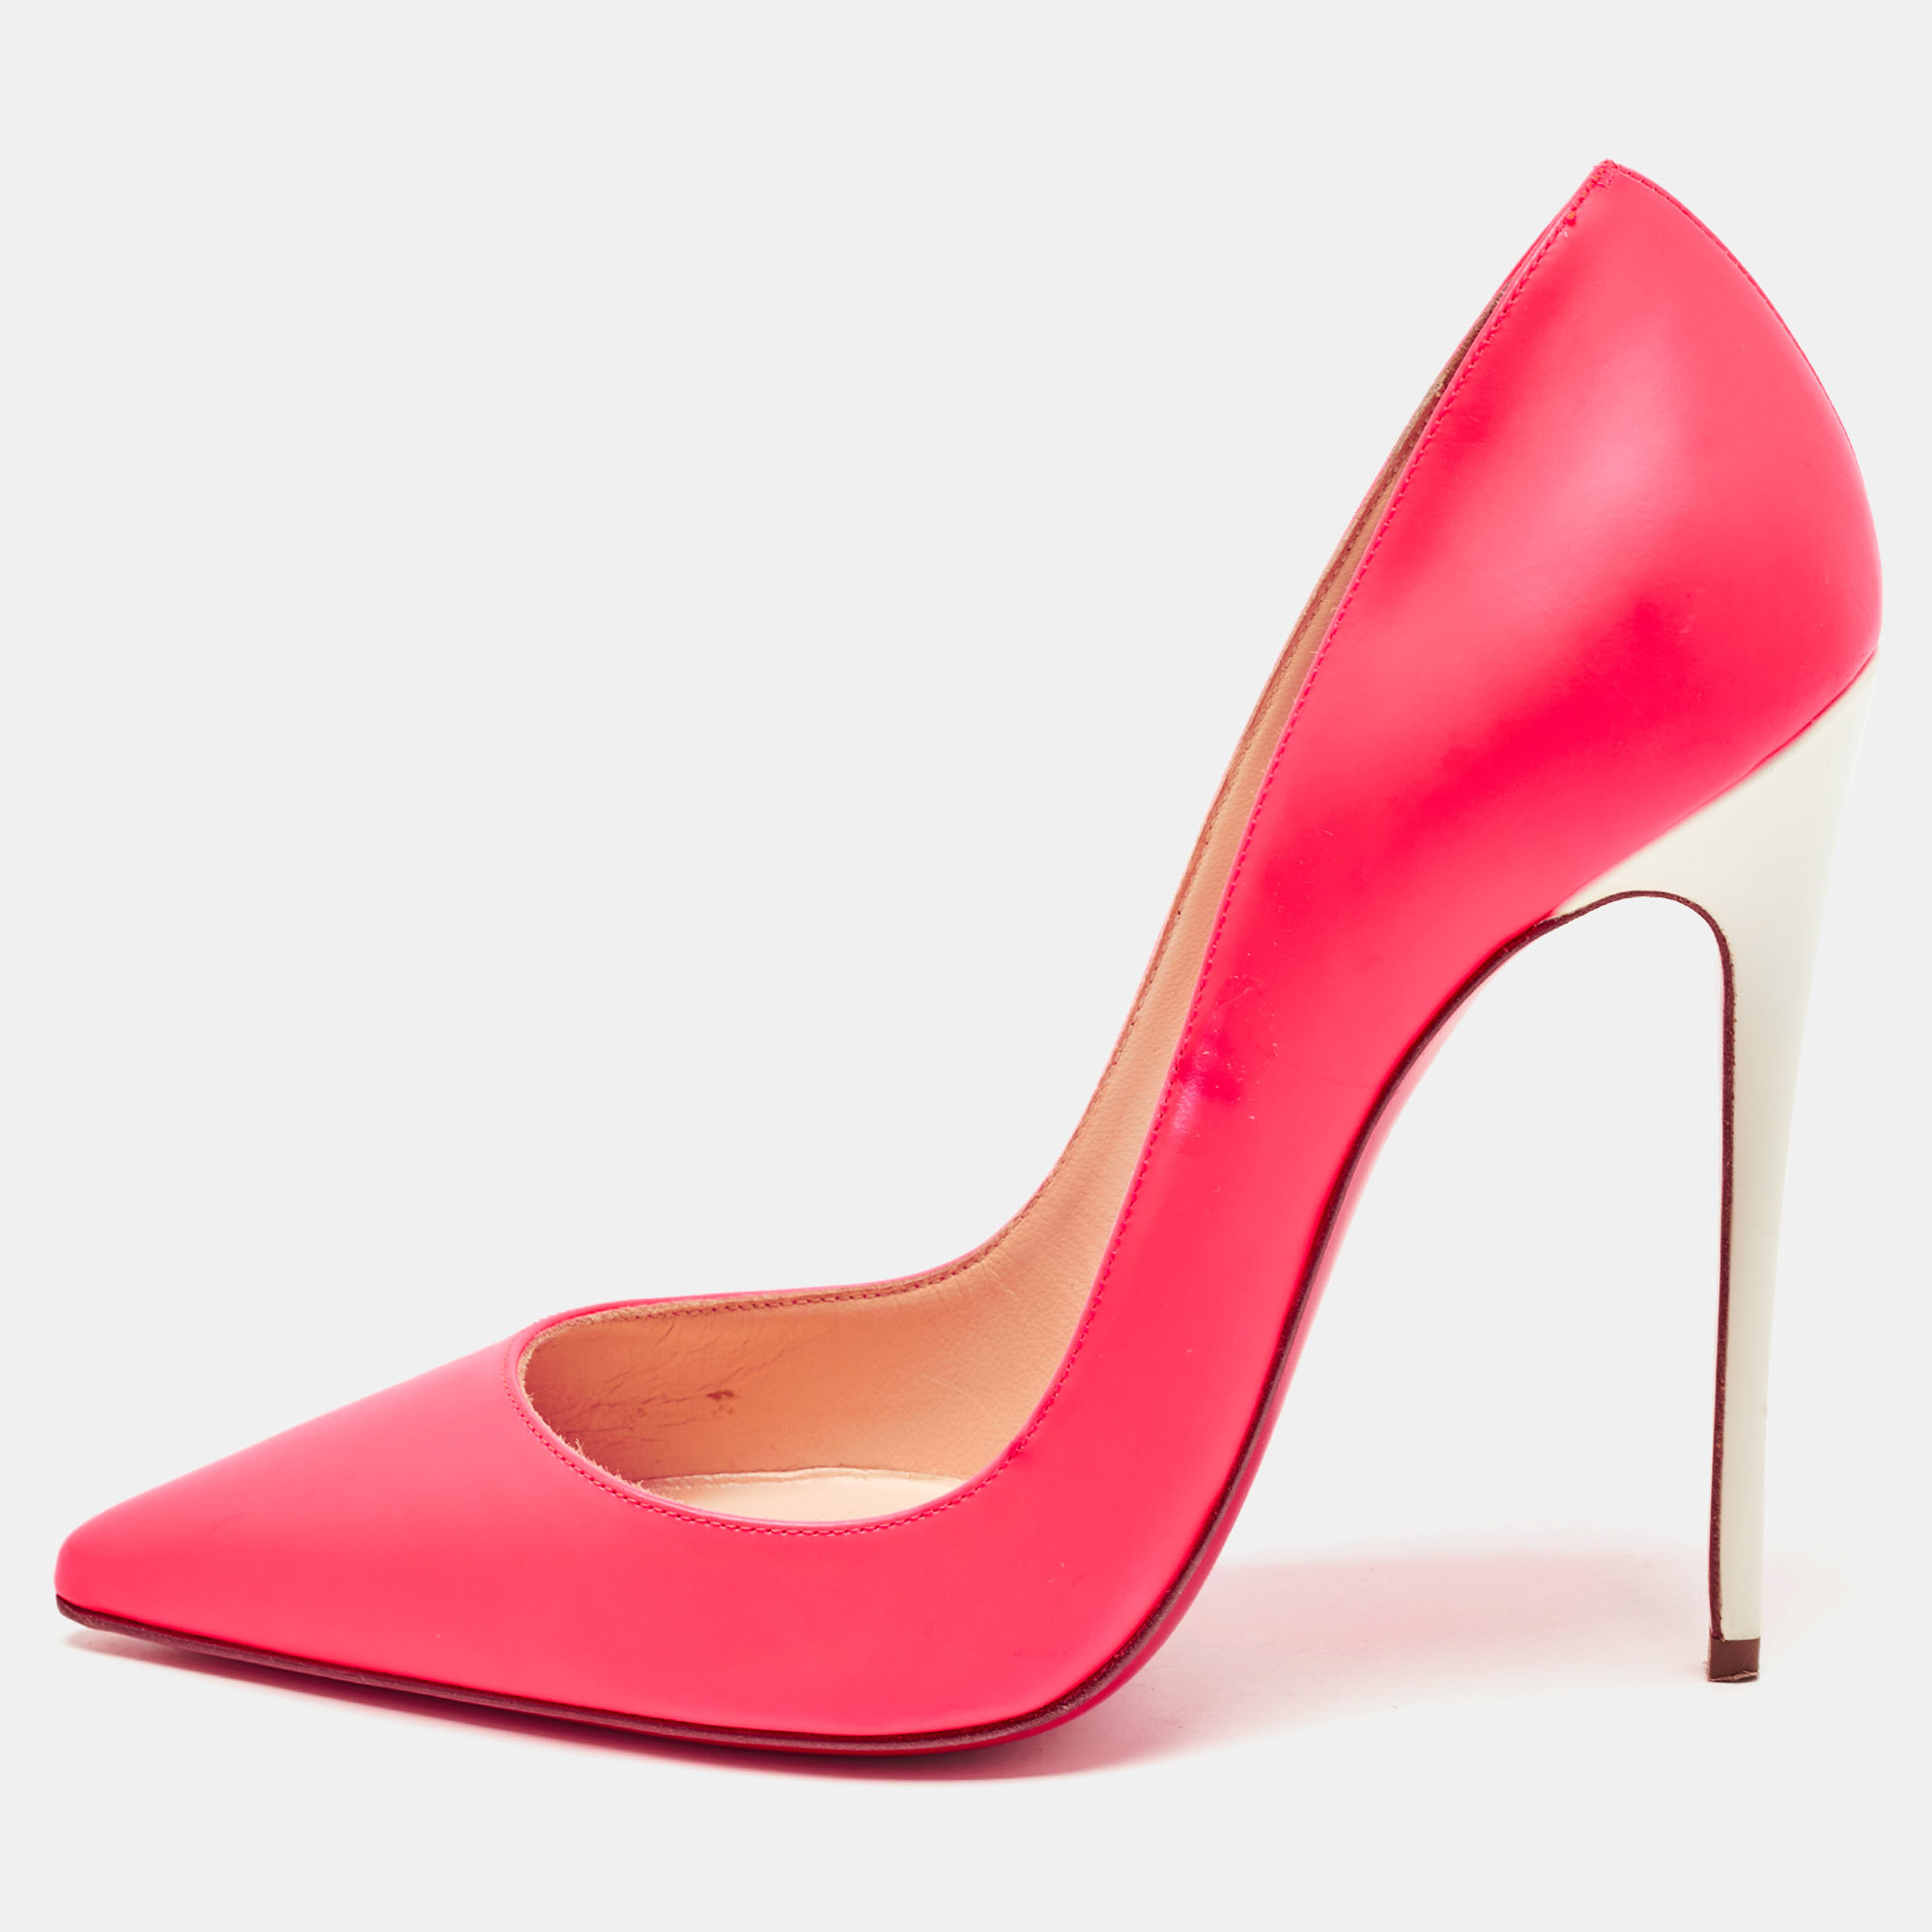 Christian louboutin neon pink leather so kate pumps size 37.5